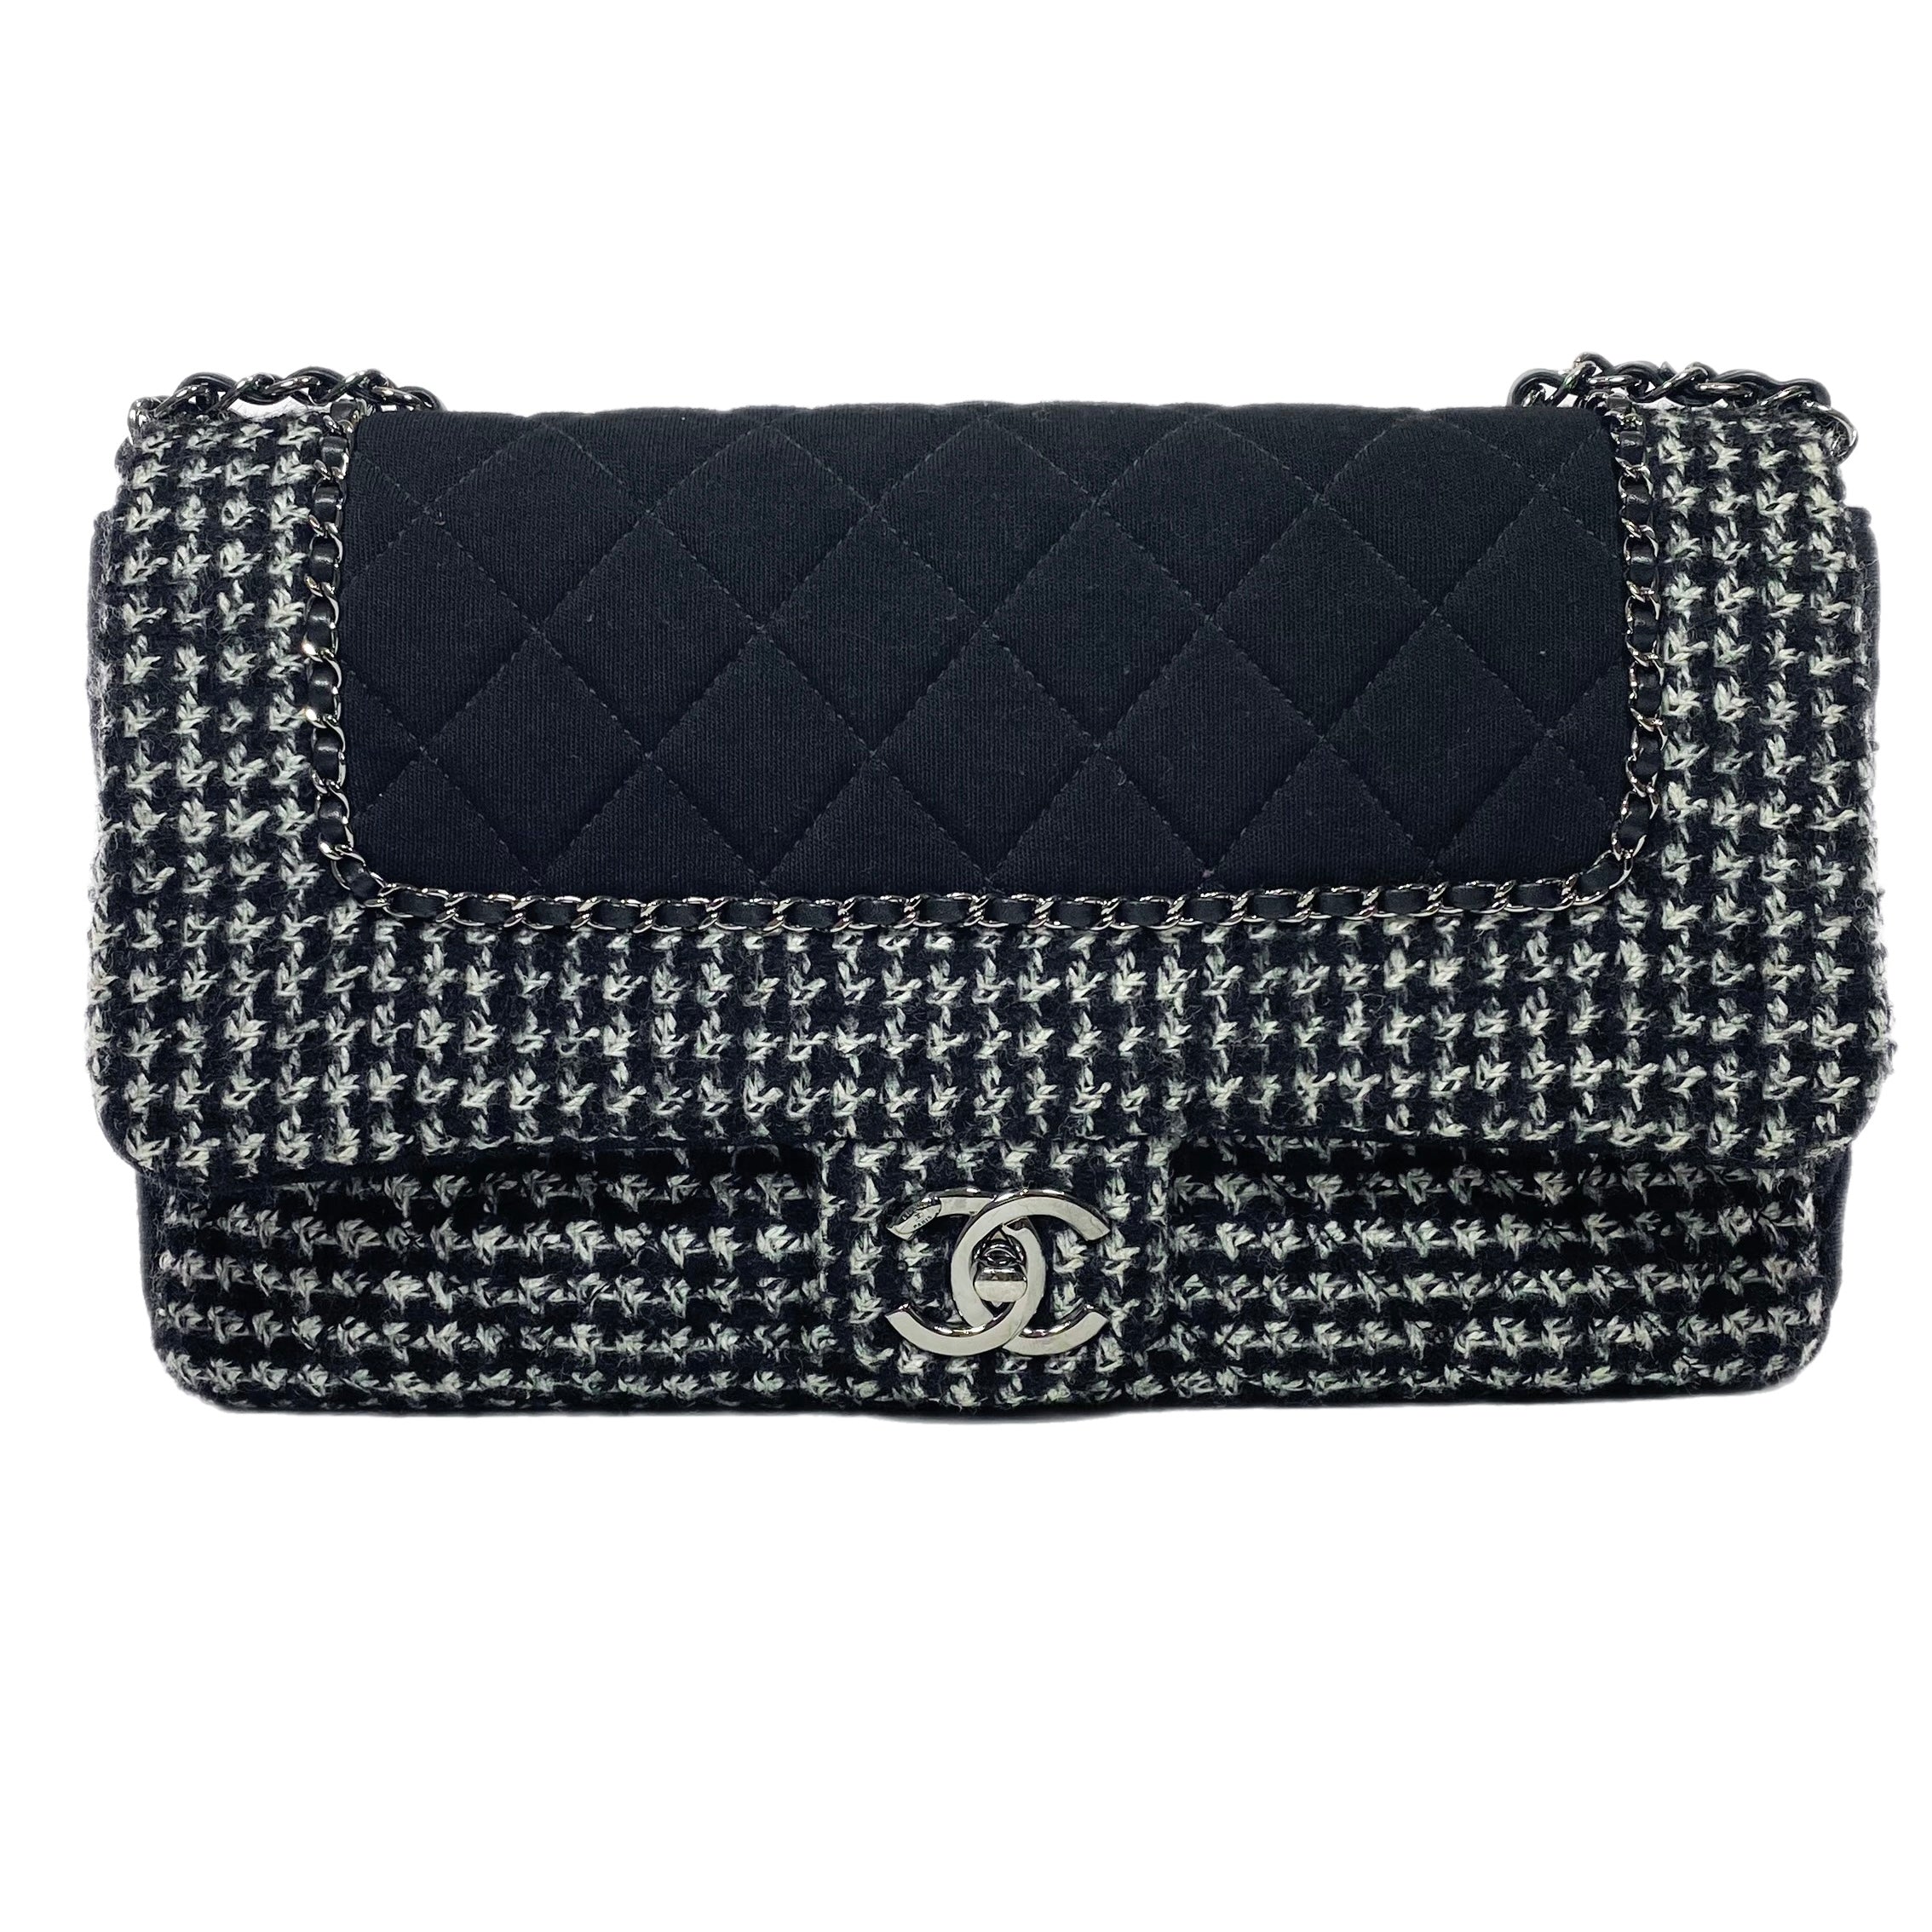 Chanel Black and Ecru Tweed Jersey Quilted Large Flap Bag